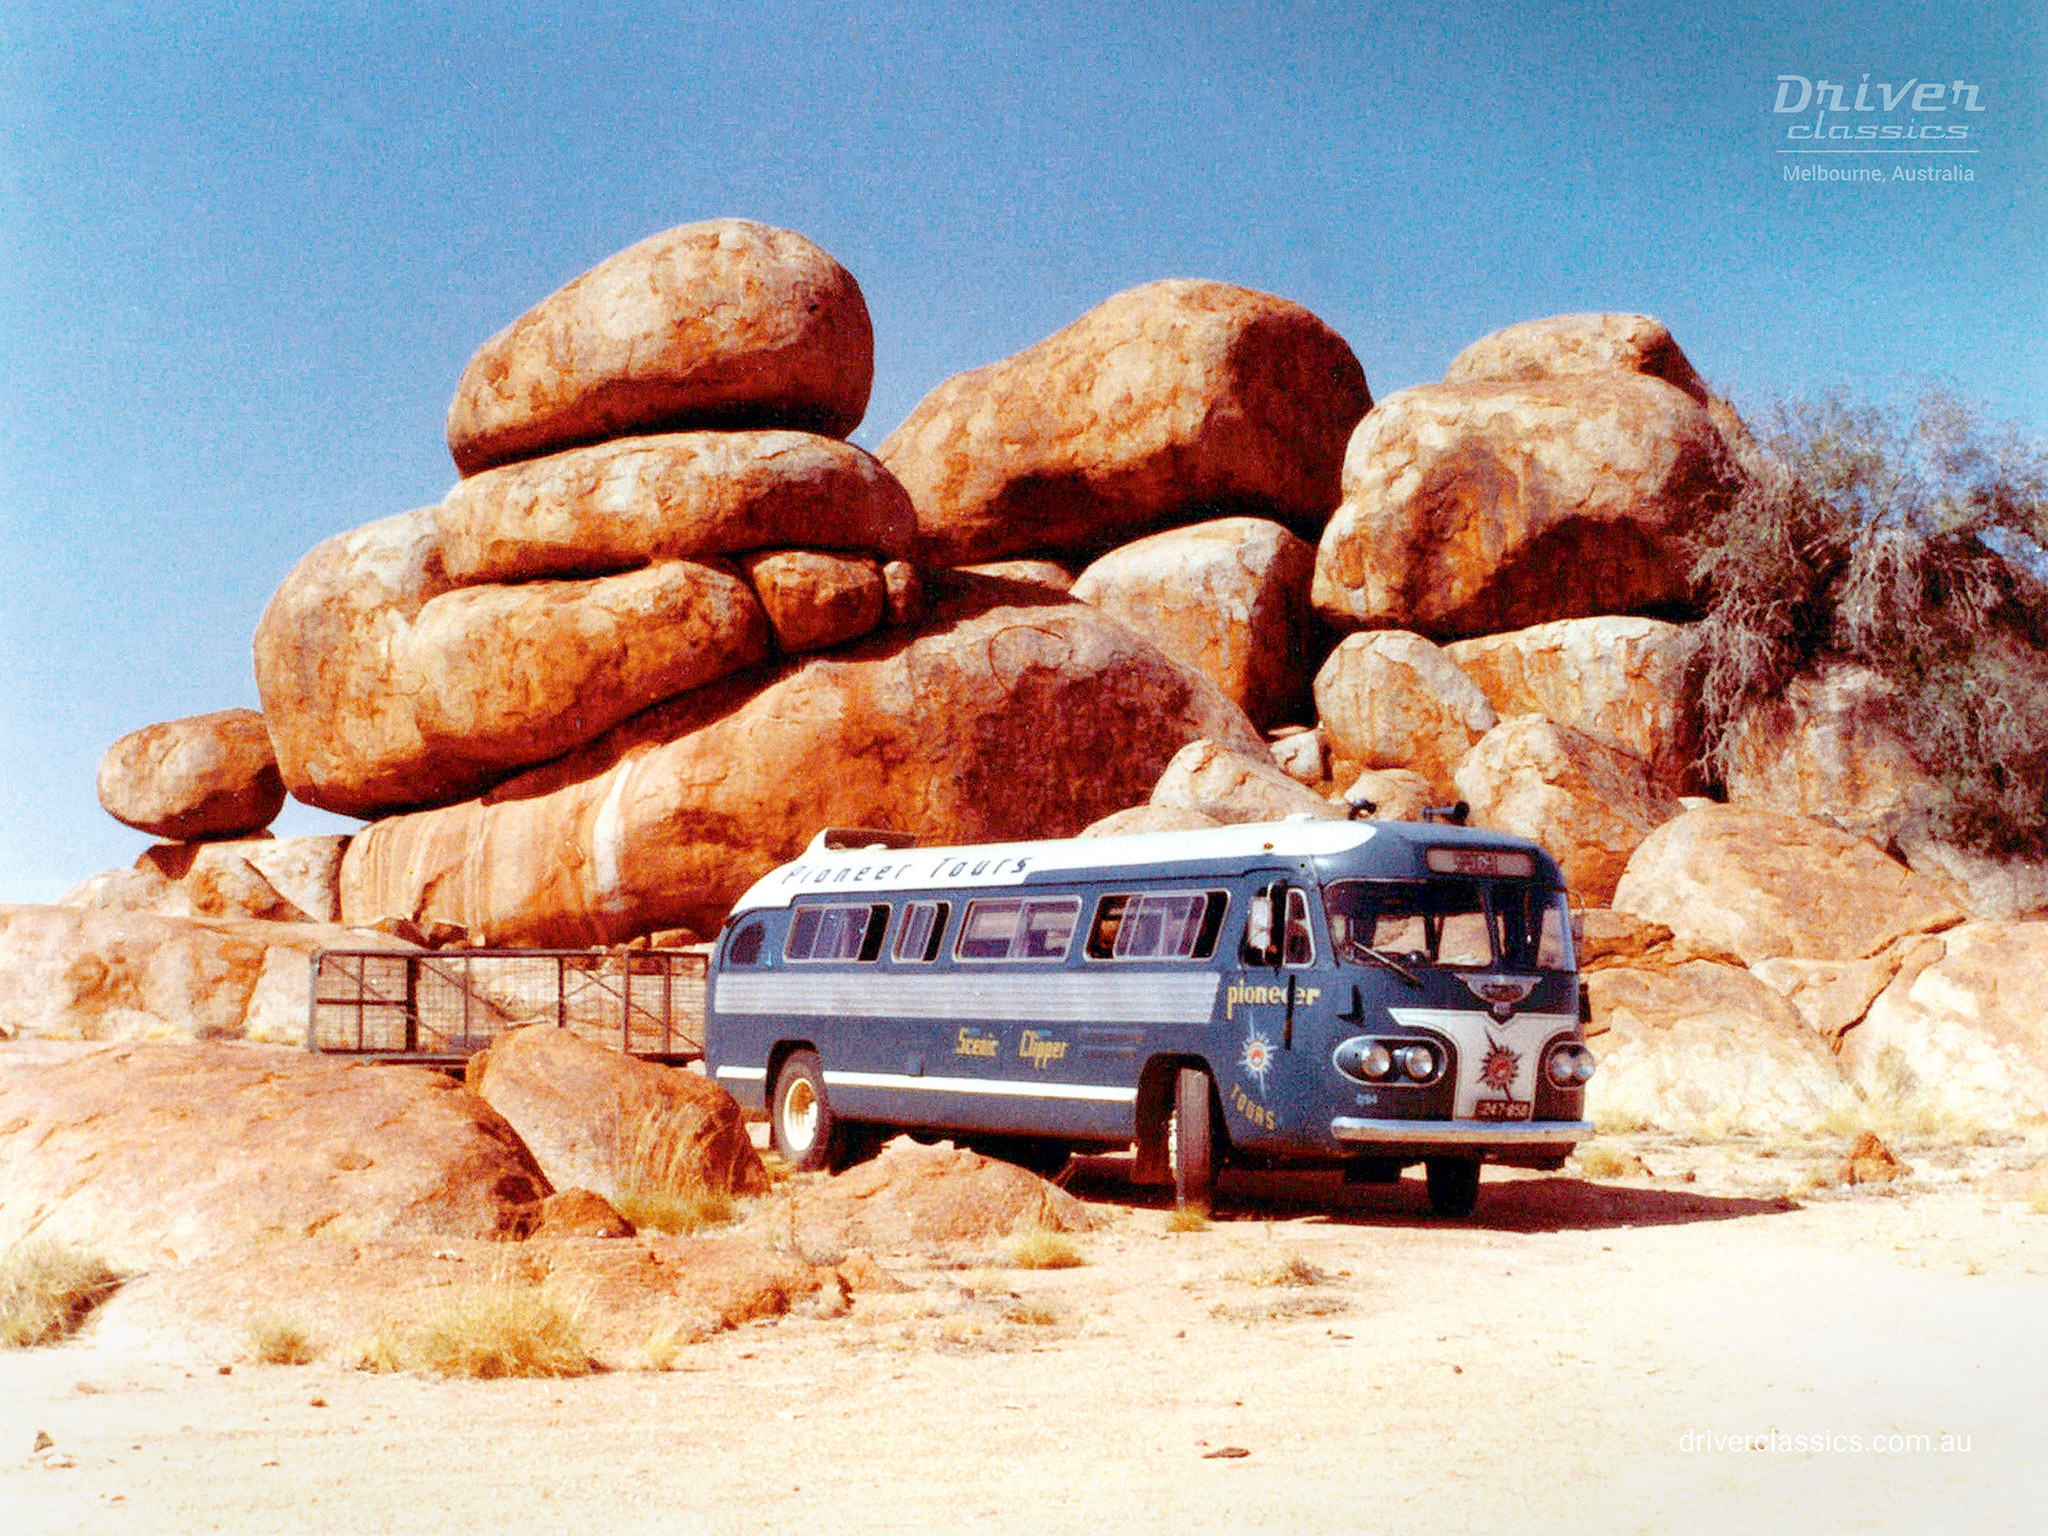 Ansair Flxible Clipper bus (1957 model), at Devil's Marbles, Northern Territory Australia, photo taken late 1960s by Graeme Phillips